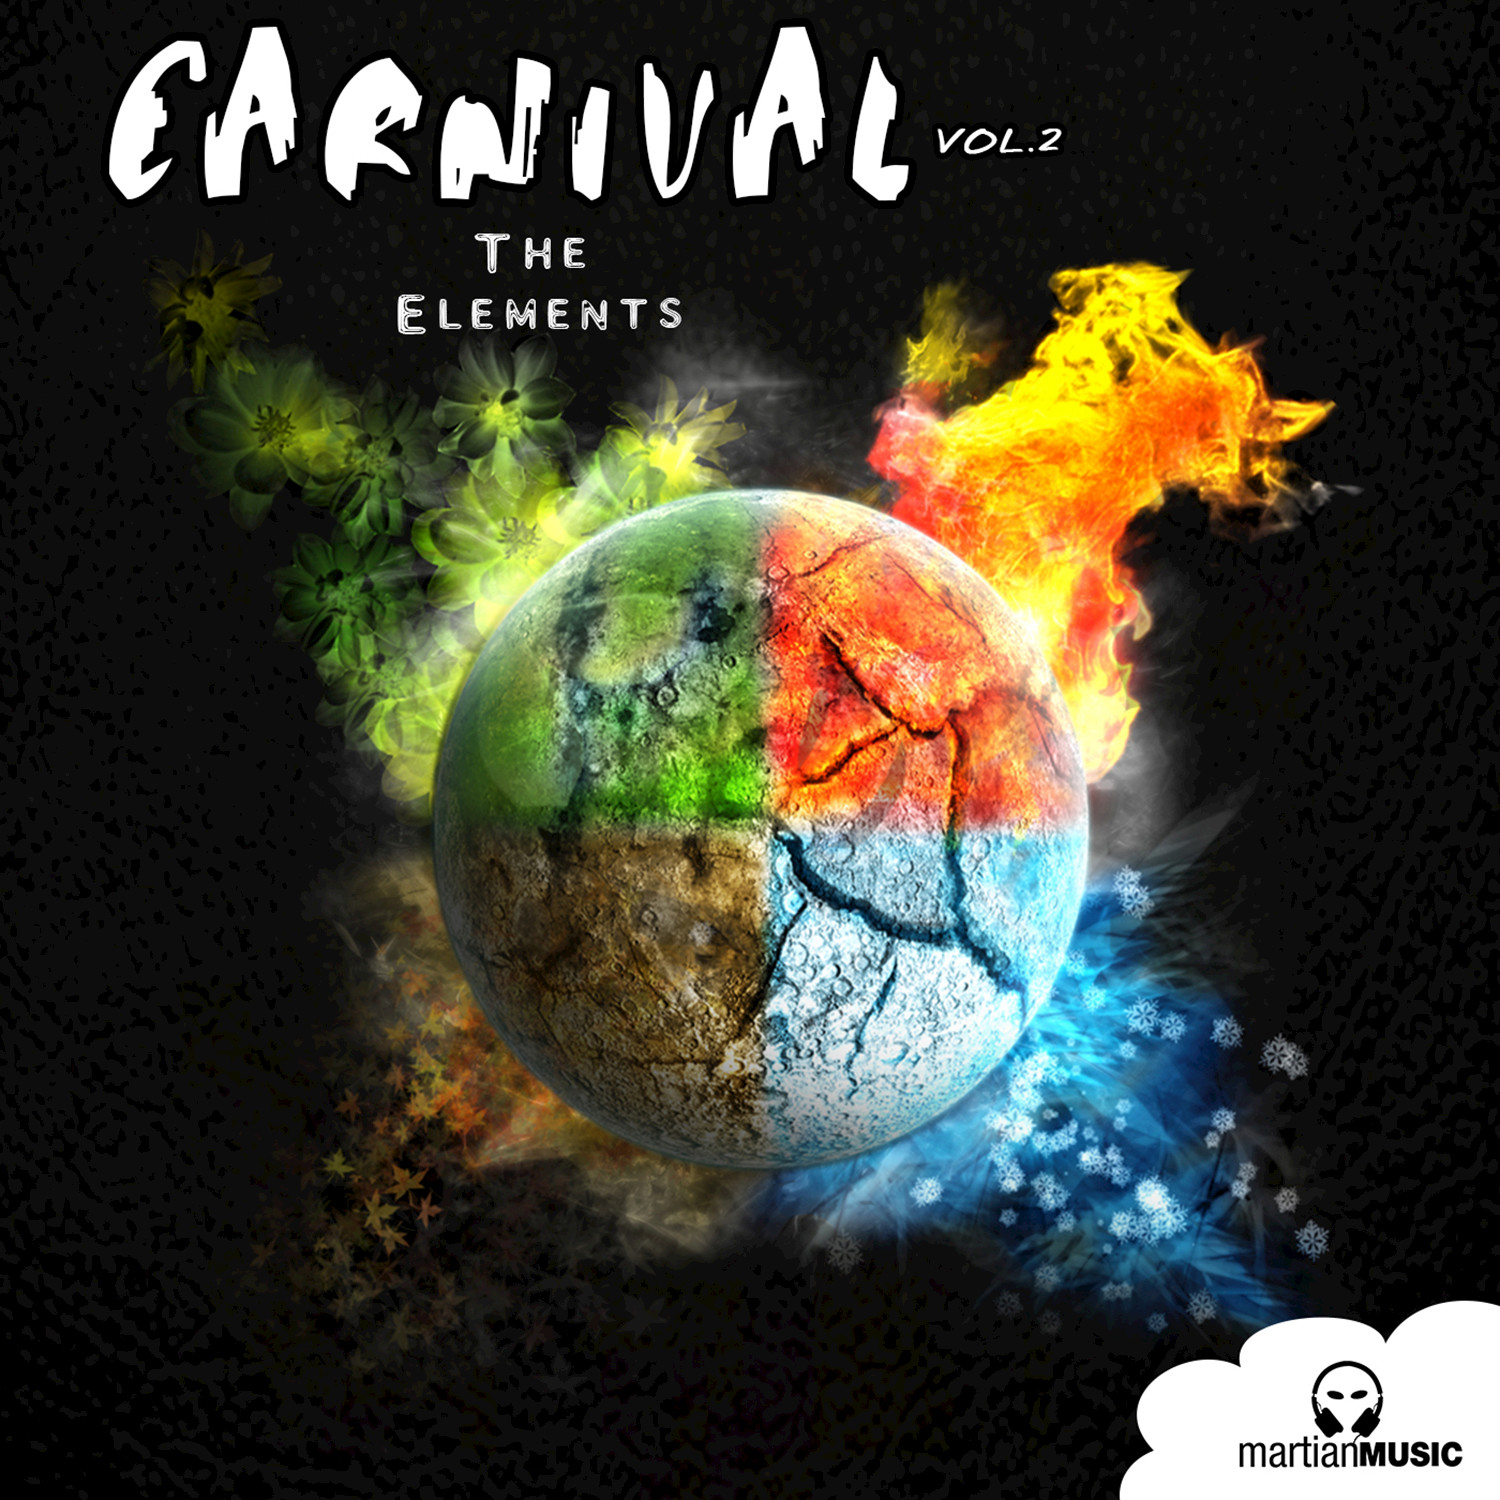 Carnival: Vol. 2 (The Elements)